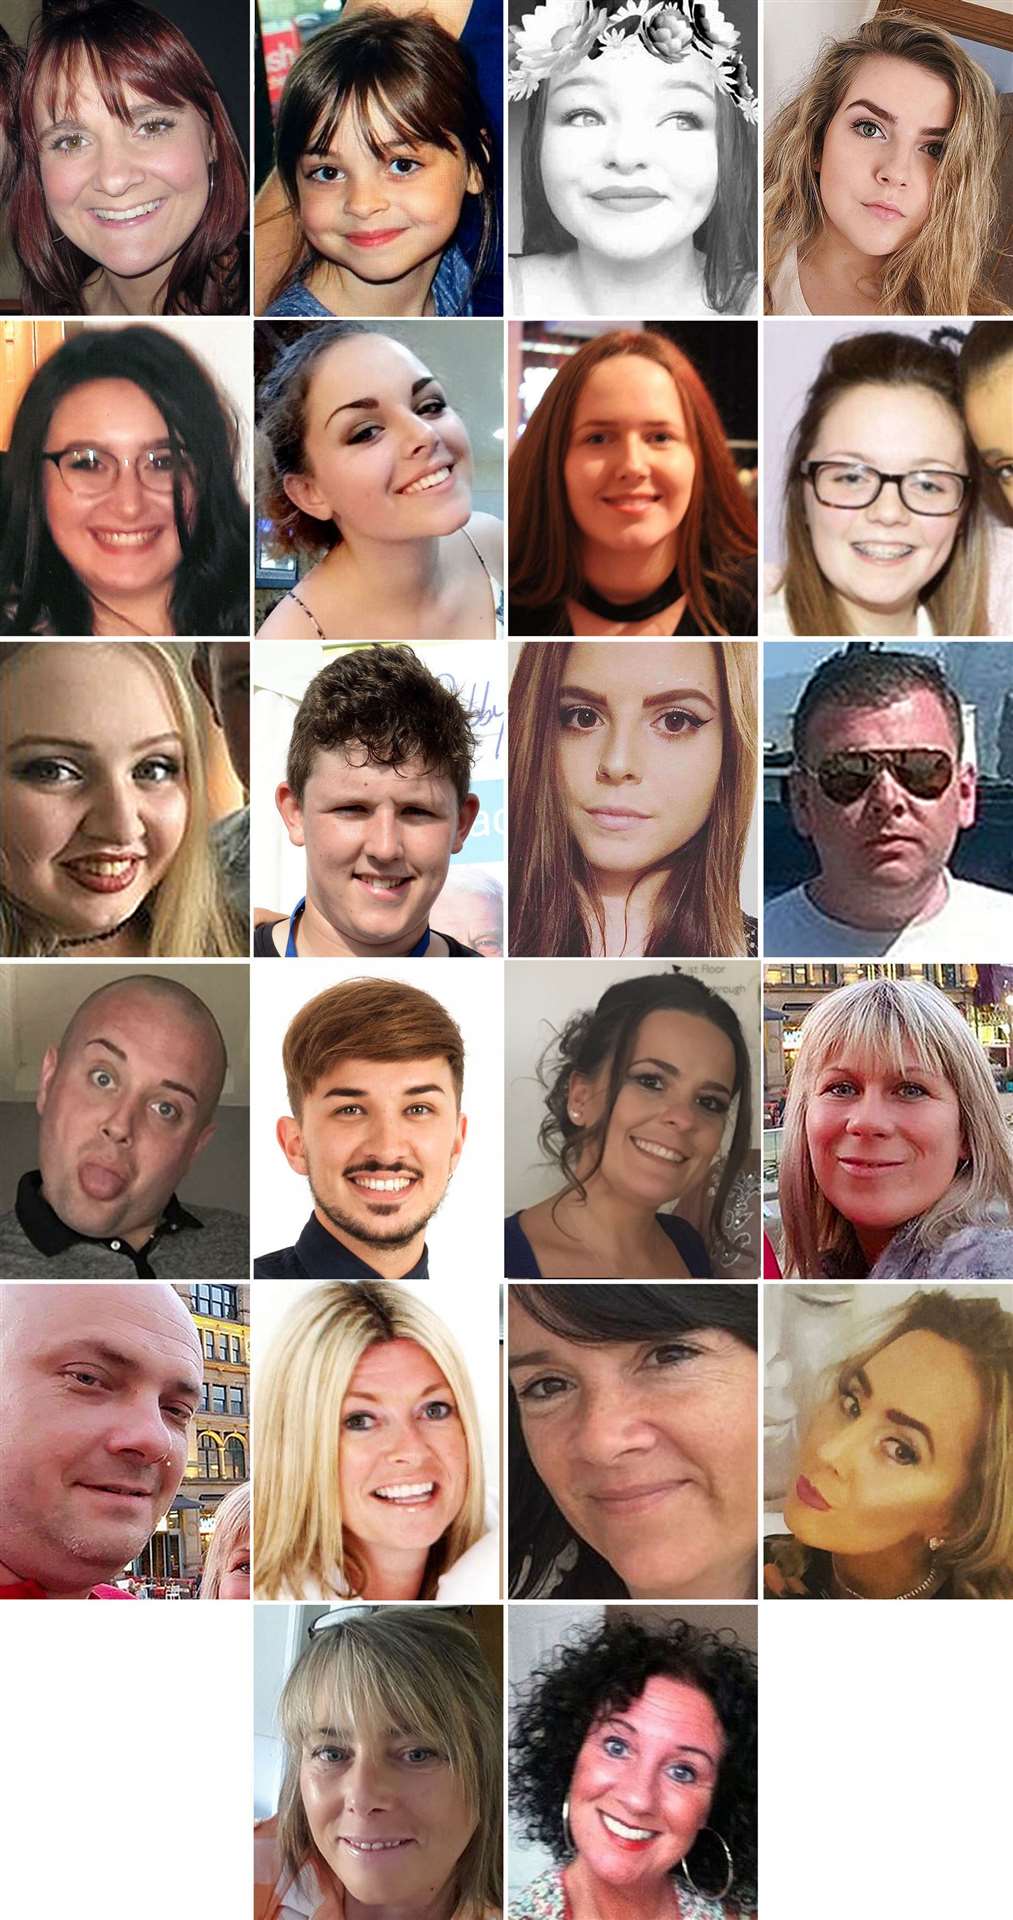 The 22 victims of the Manchester Arena attack. (Top row, left to right) Elaine McIver, Saffie Roussos, Sorrell Leczkowski, Eilidh MacLeod; (second row) Nell Jones, Olivia Campbell-Hardy, Megan Hurley, Georgina Callander; (third row), Chloe Rutherford, Liam Curry, Courtney Boyle, Philip Tron; (fourth row) John Atkinson, Martyn Hett, Kelly Brewster, Angelika Klis; (fifth row) Marcin Klis, Michelle Kiss, Alison Howe, Lisa Lees; (sixth row) Wendy Fawell and Jane Tweddle (Greater Manchester Police/PA)